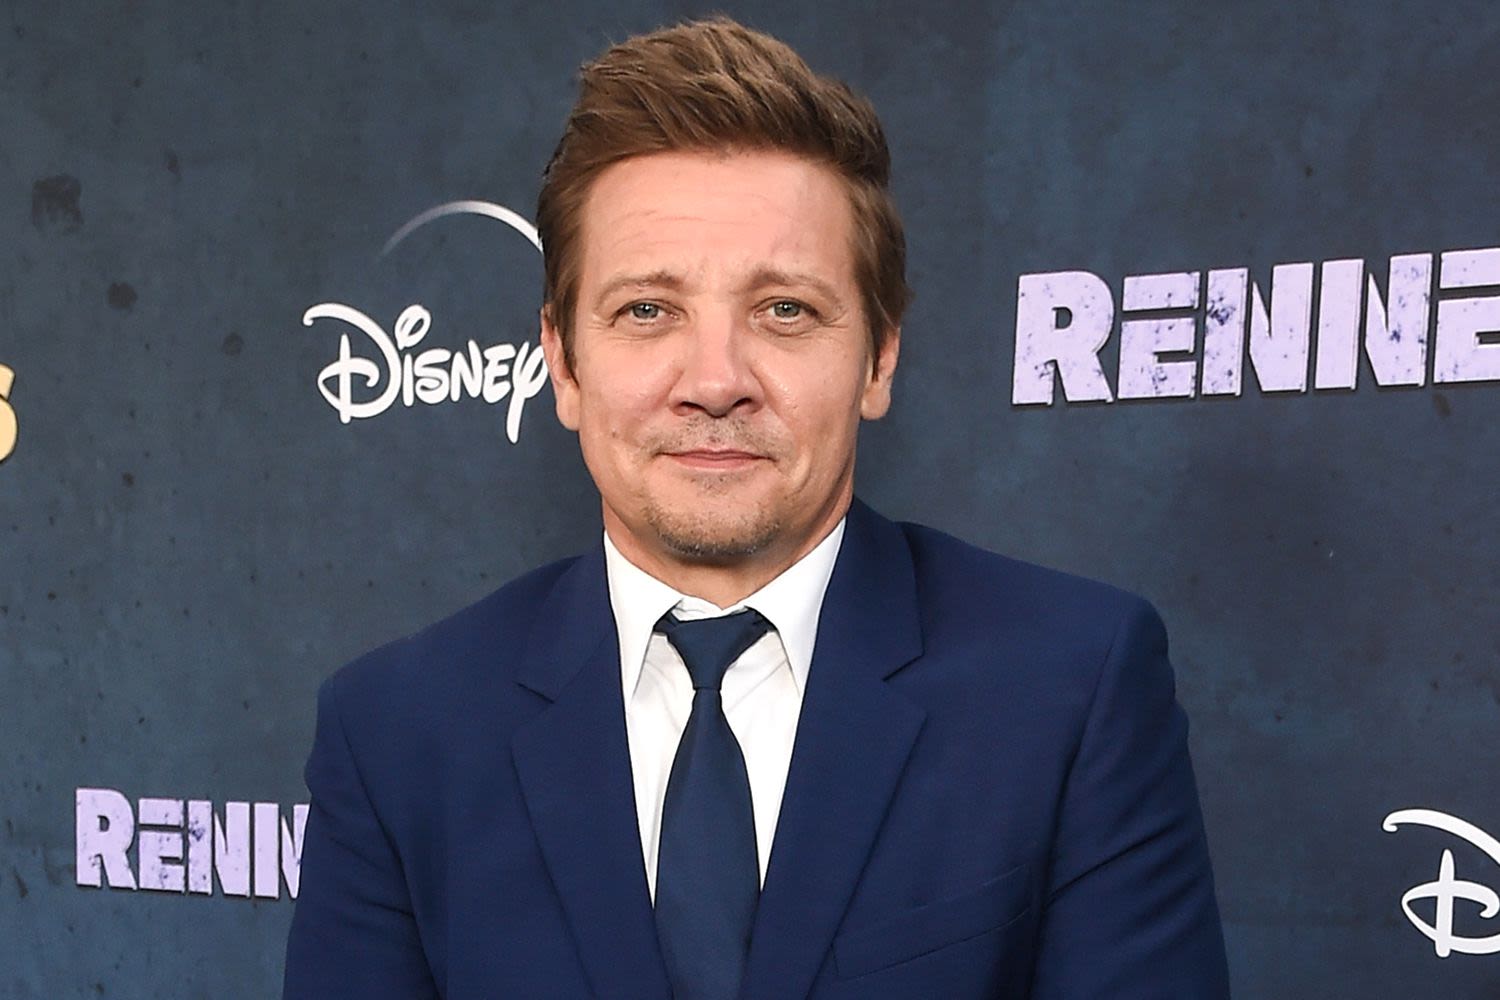 Jeremy Renner Reveals Why He 'Had to Leave' the 'Mission: Impossible' Franchise